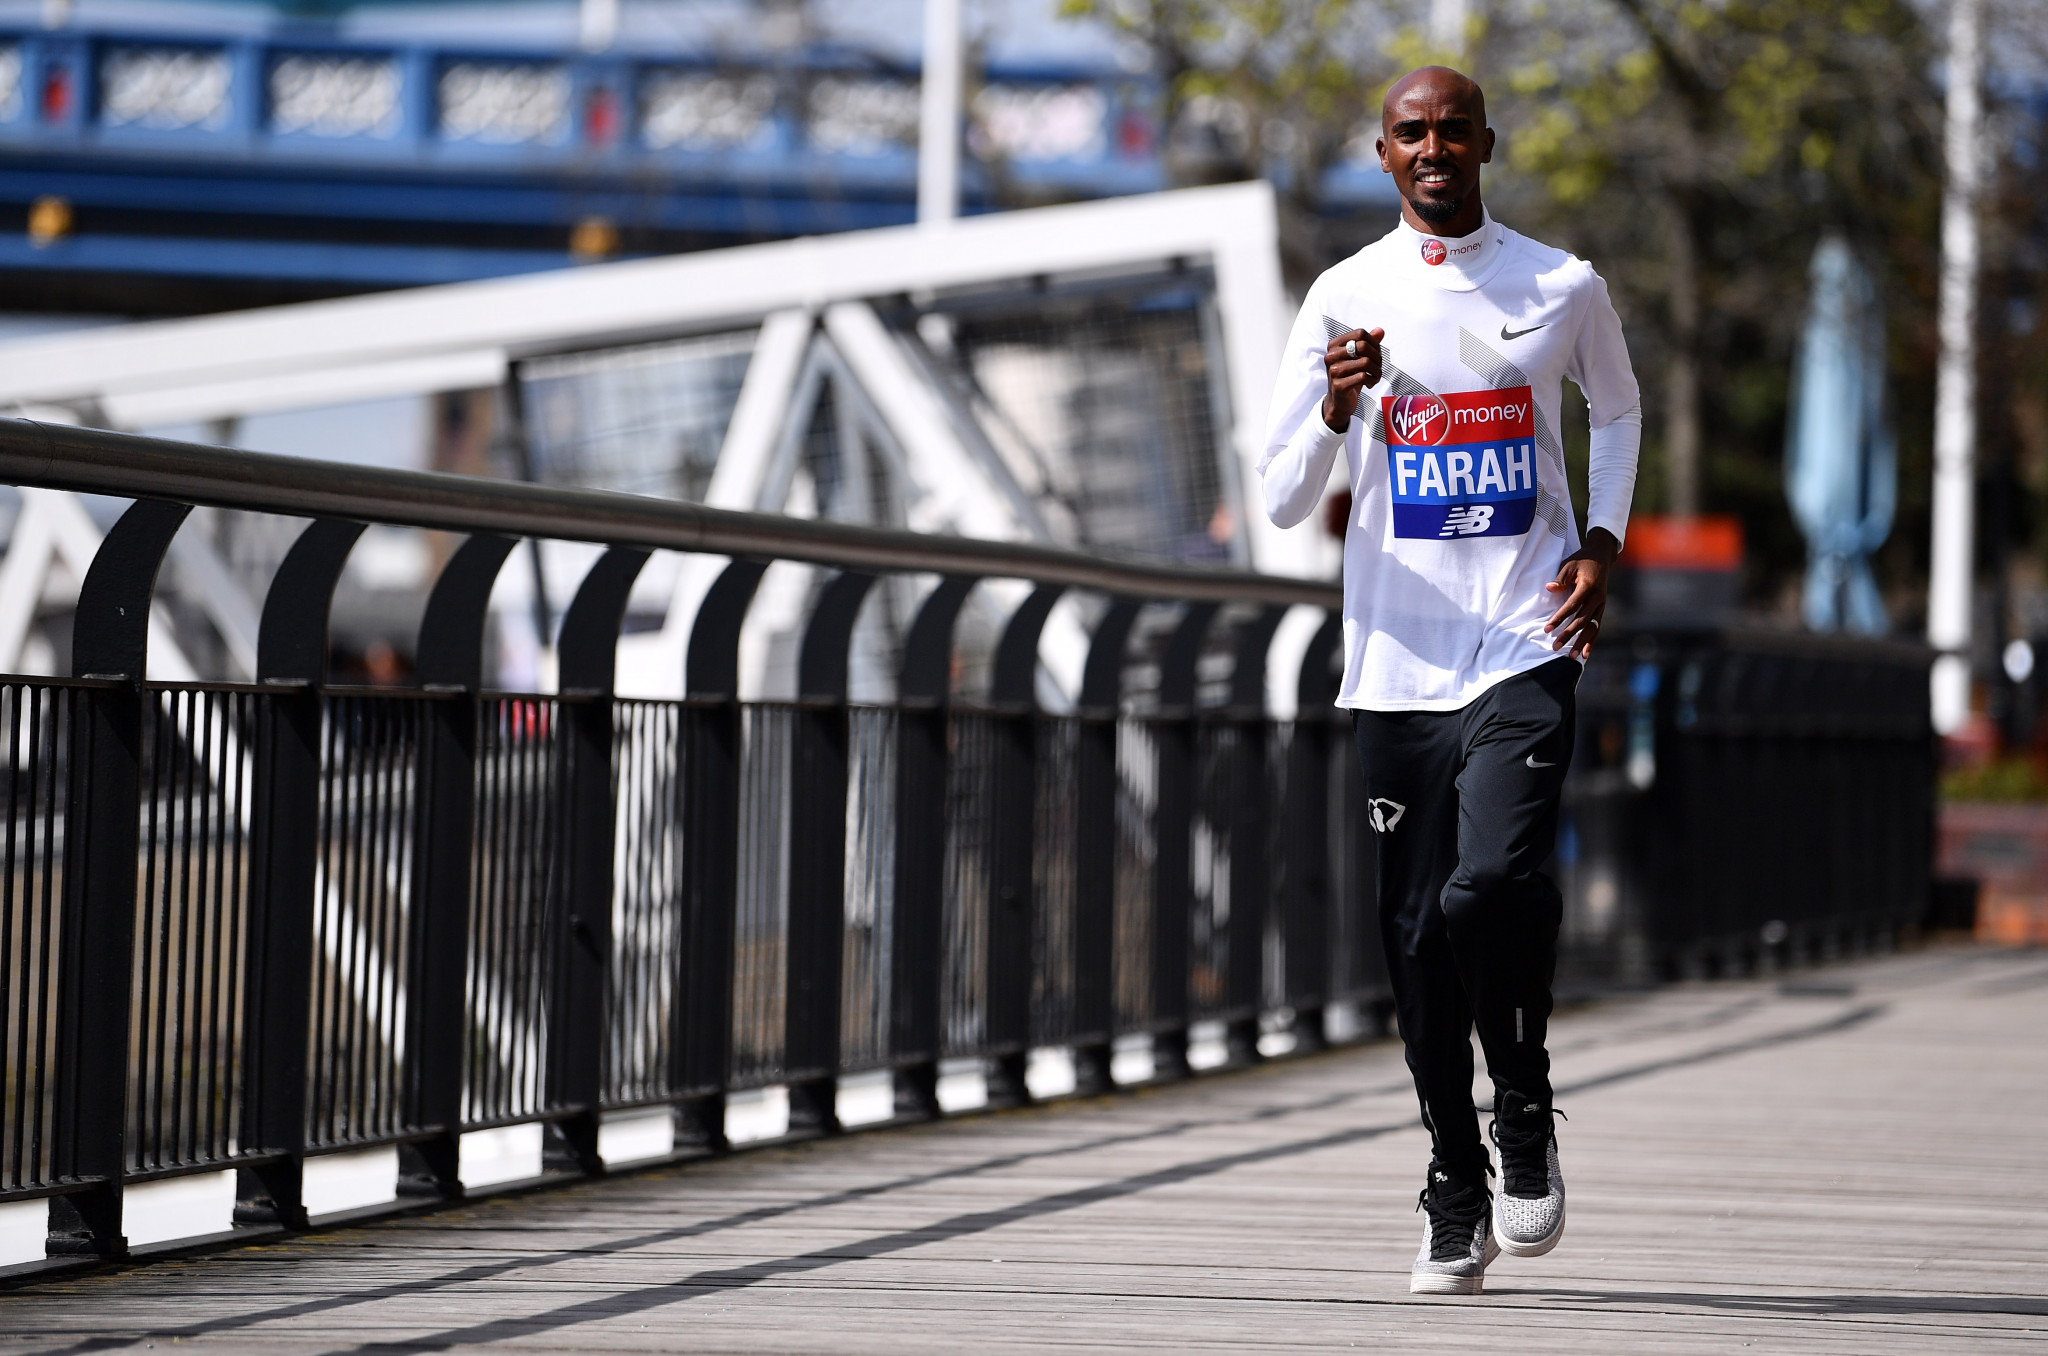 Sir Mo Farah knows he has to improve dramatically if he is to win a medal in Tokyo ©Getty Images